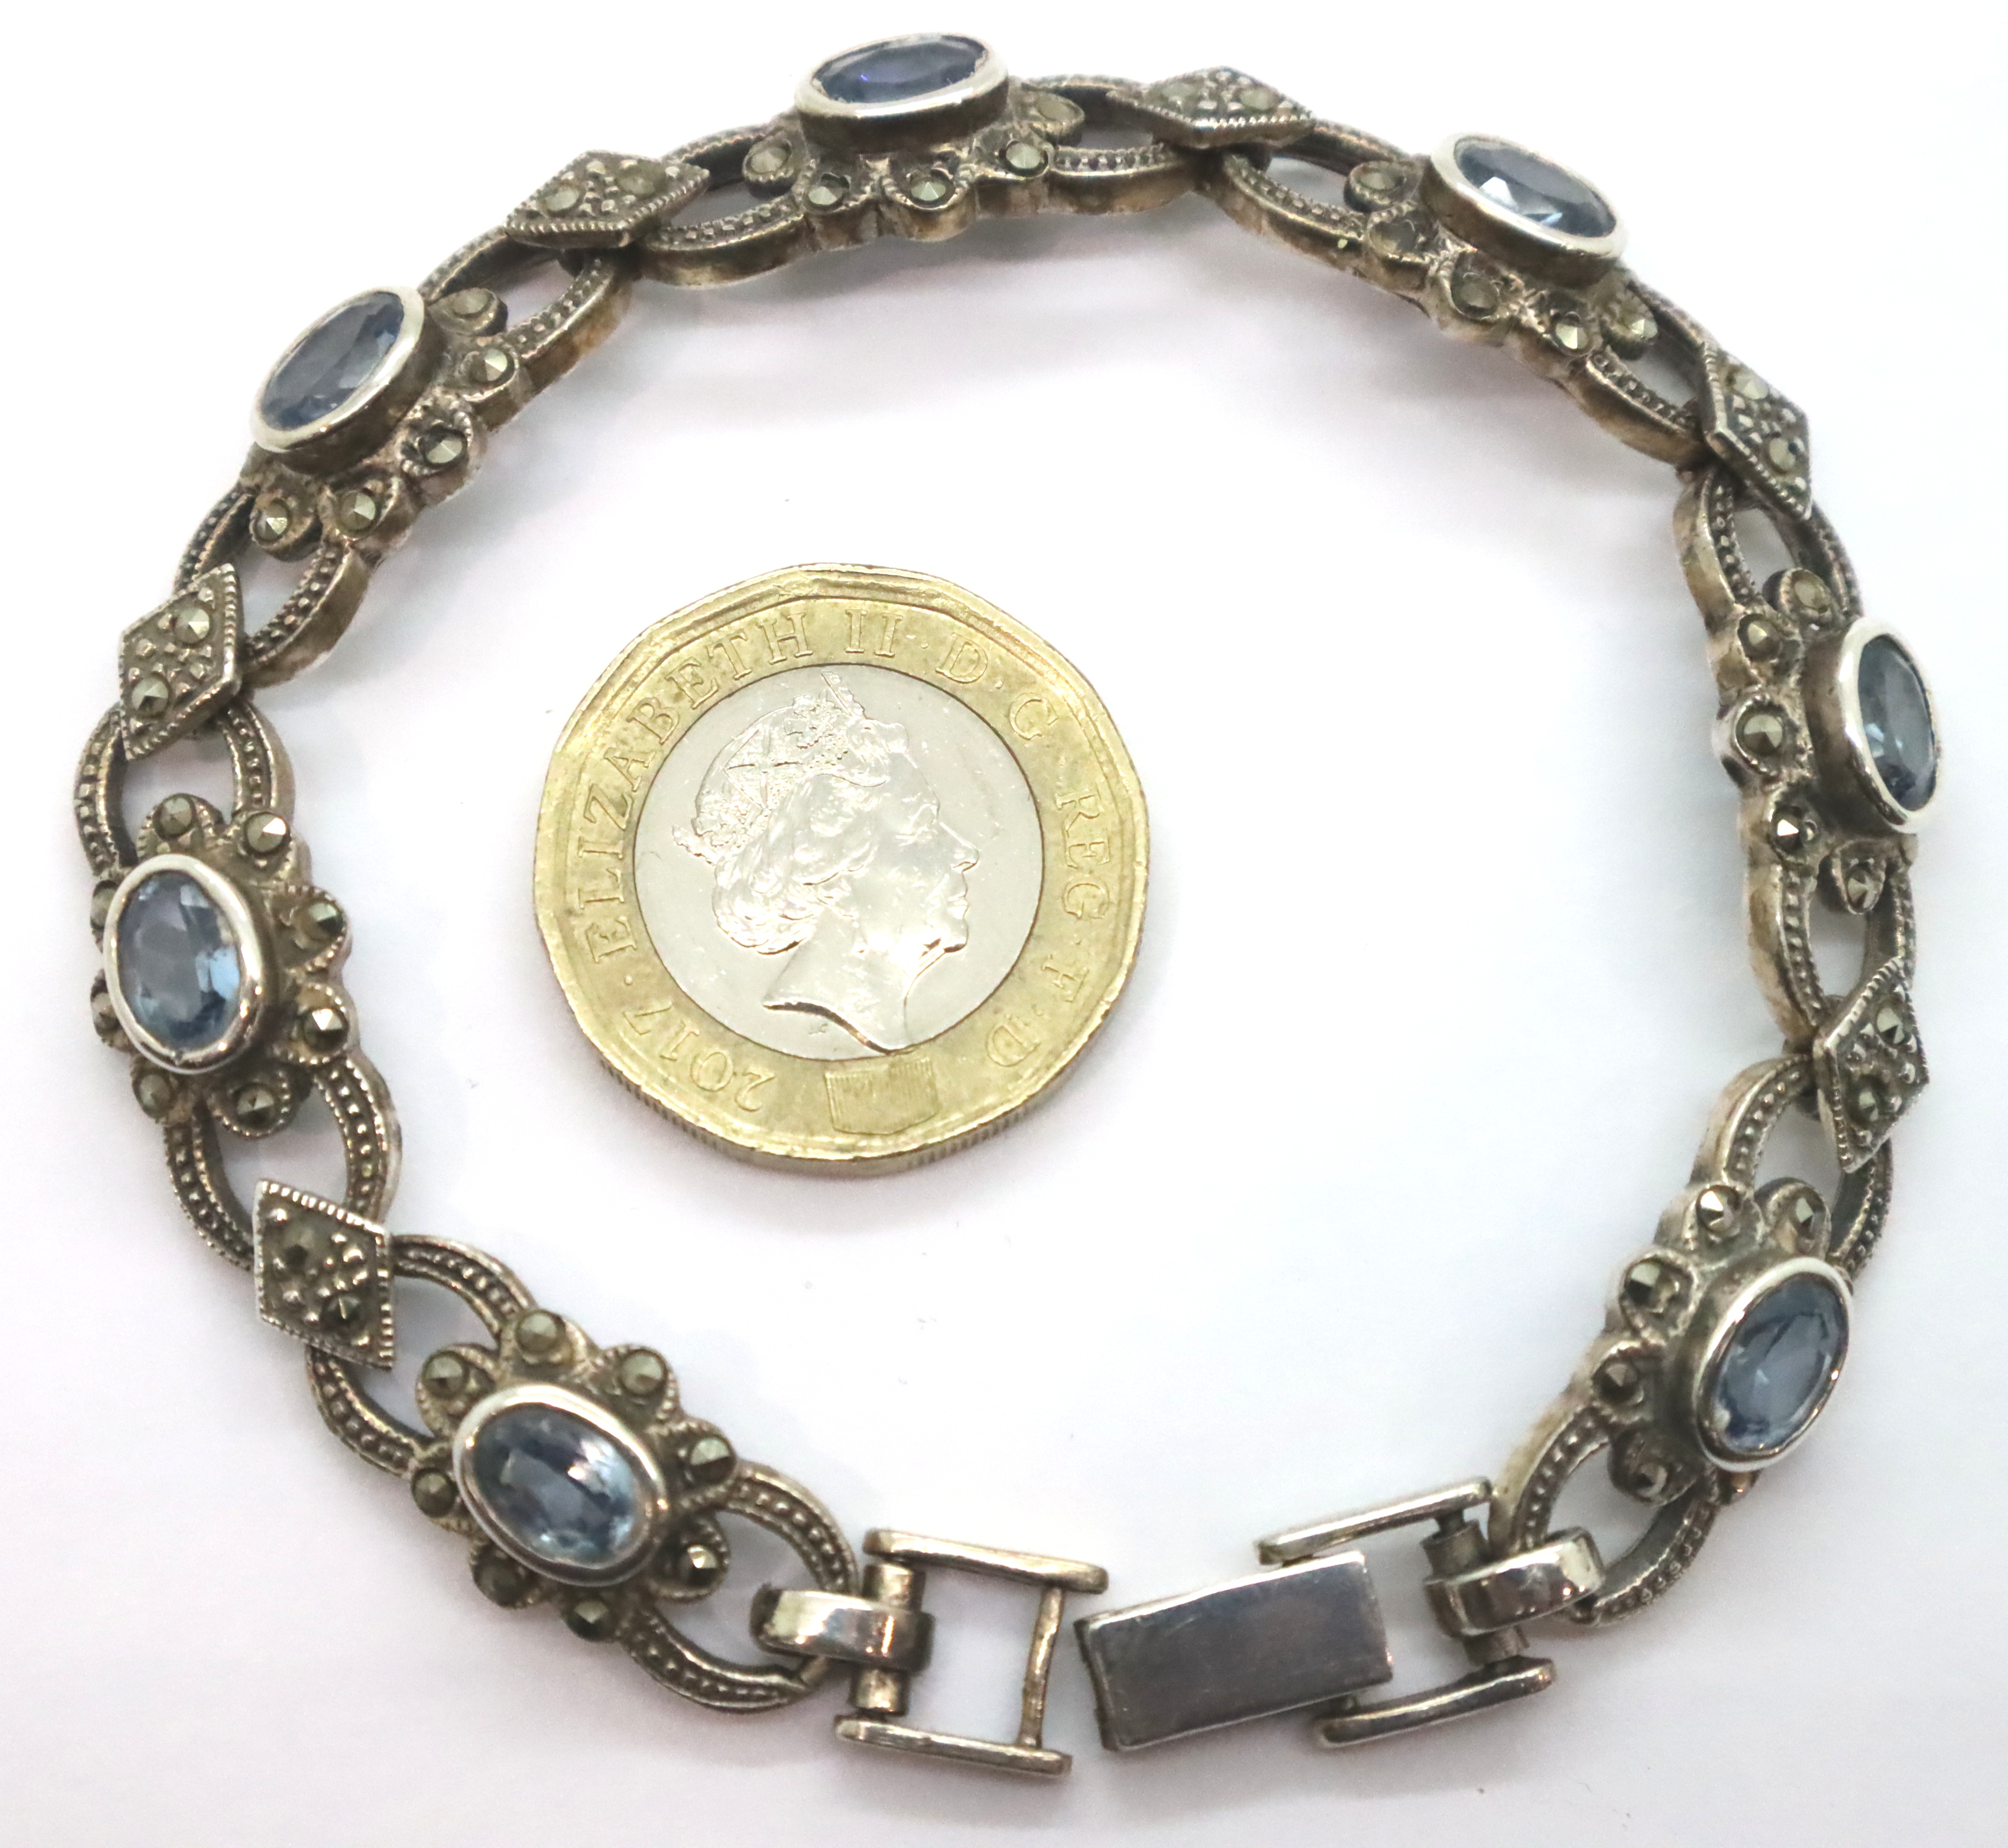 Marcasite bracelet set with blue topaz. P&P Group 1 (£14+VAT for the first lot and £1+VAT for